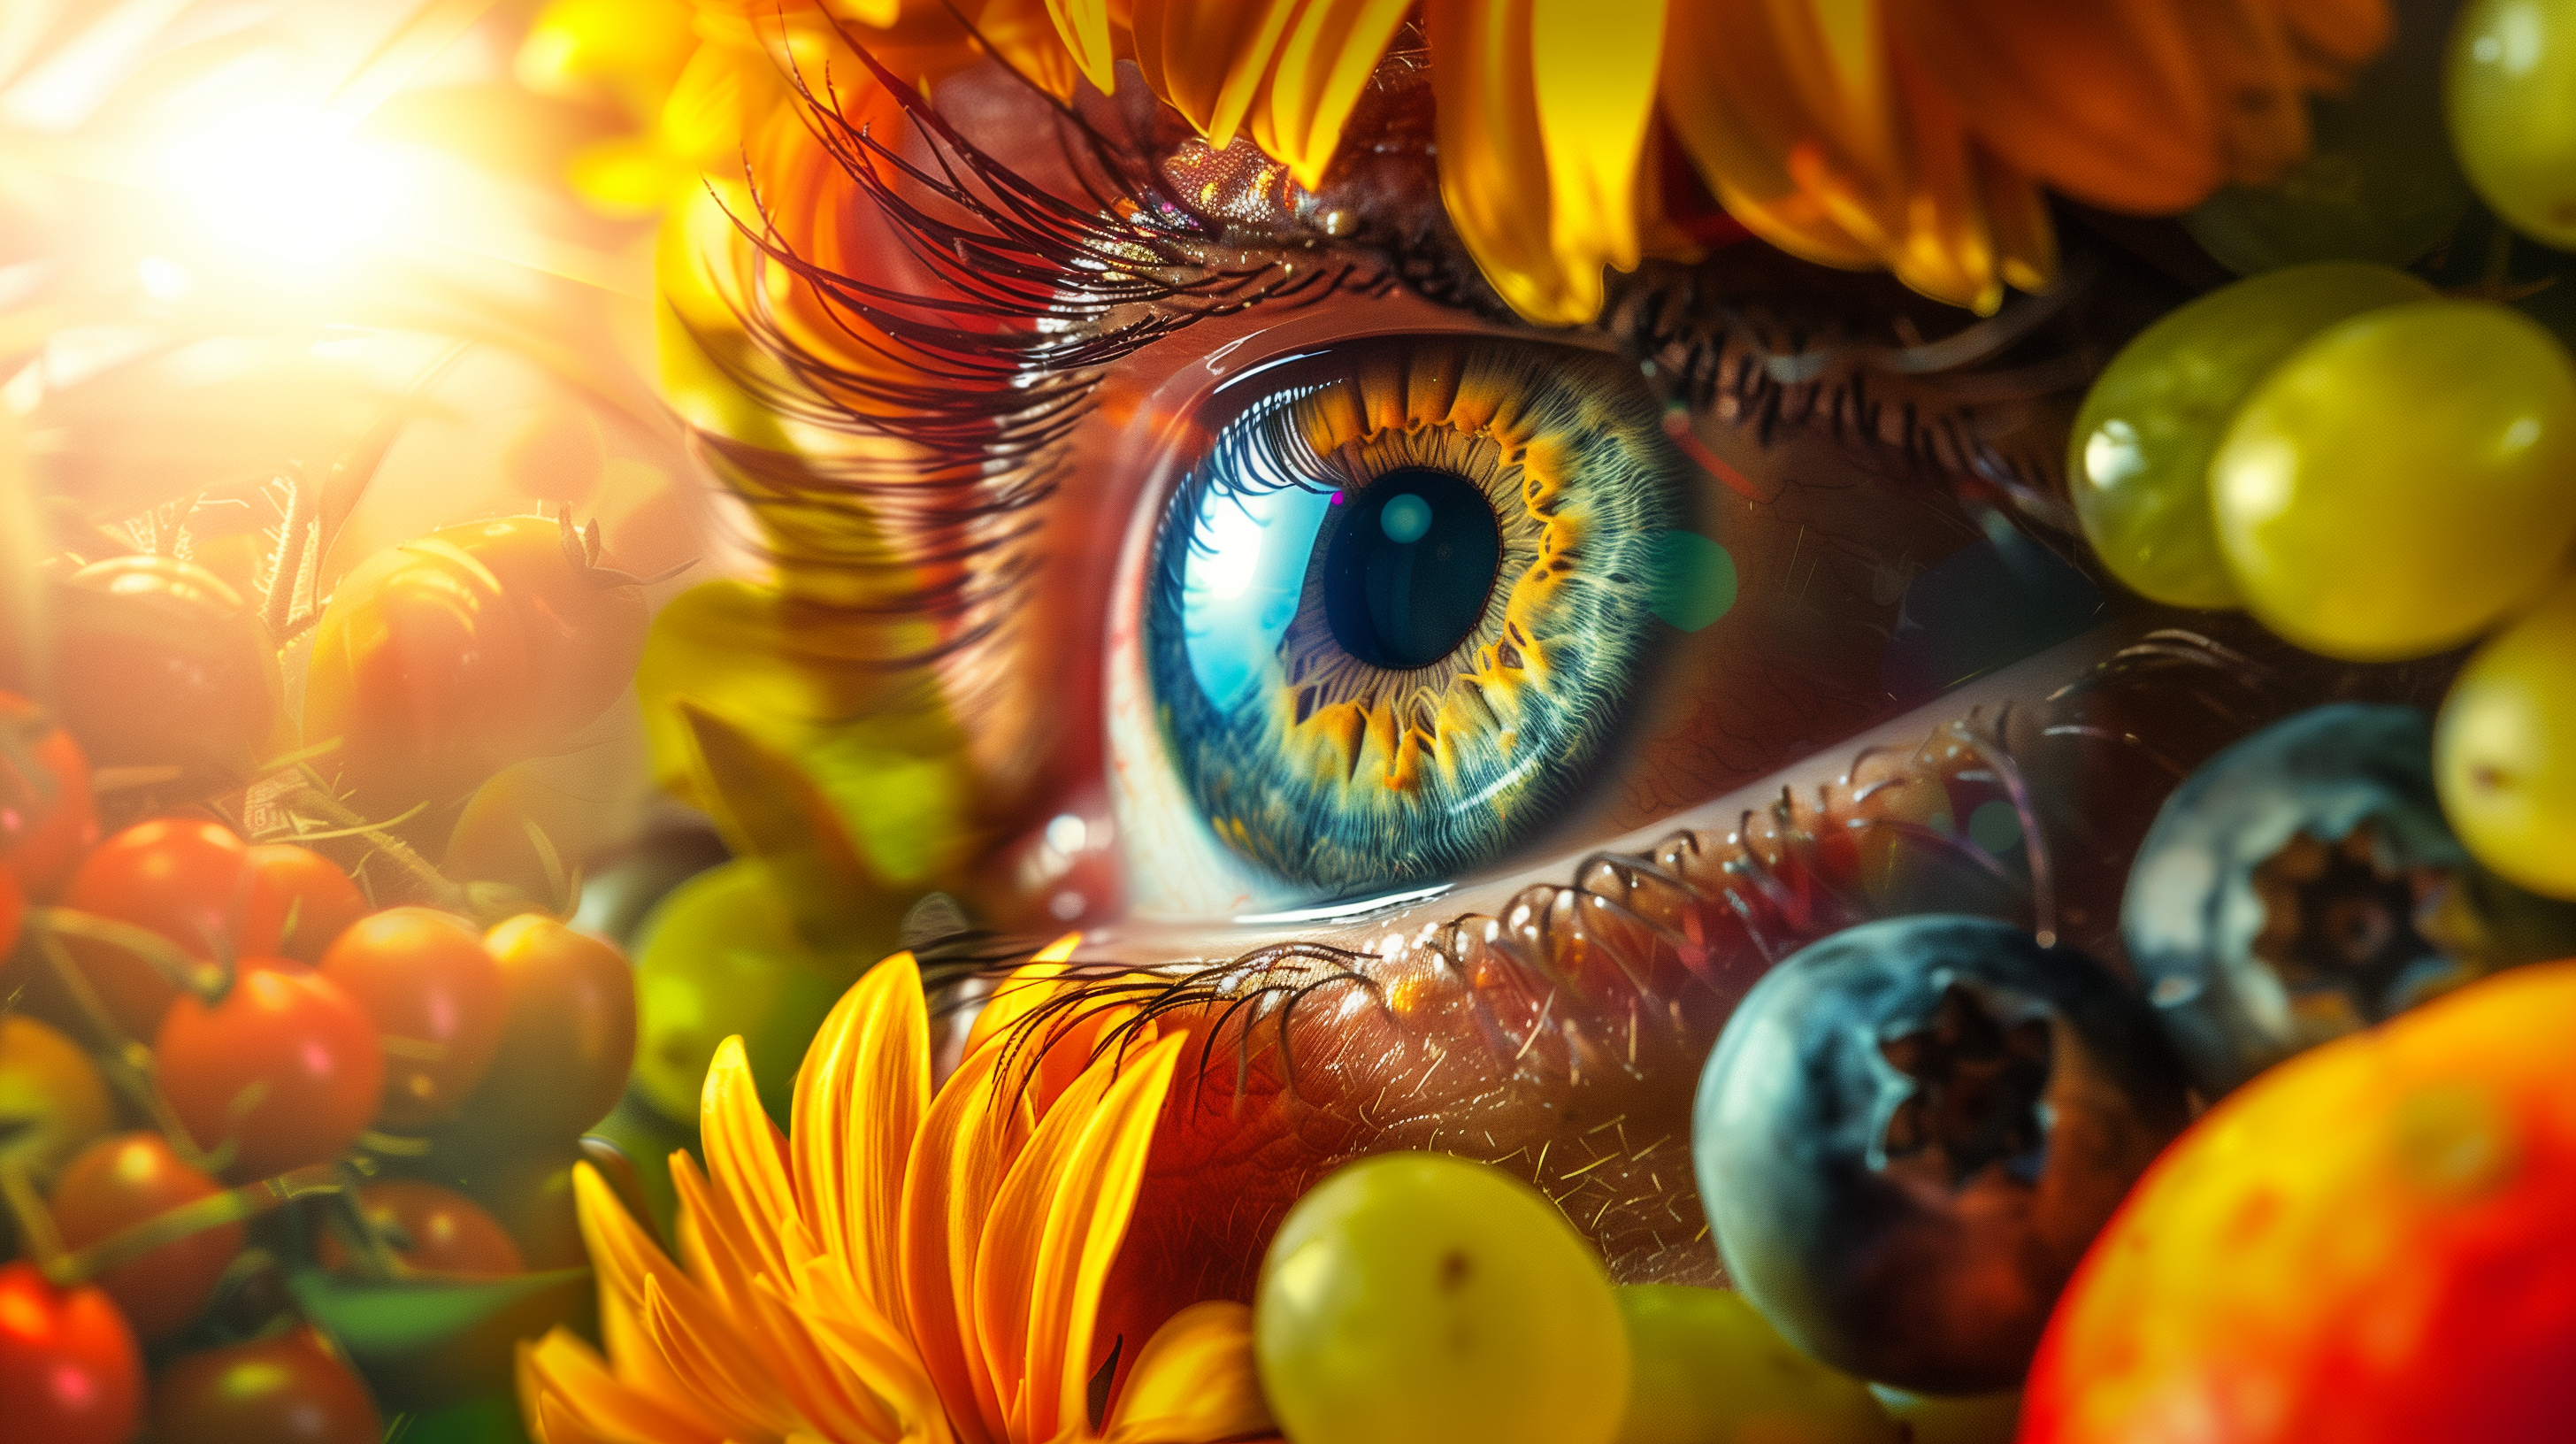 healthy human eye reflecting a shield, surrounded by colorful fruits and vegetables rich in Vitamins A, D, E, and K